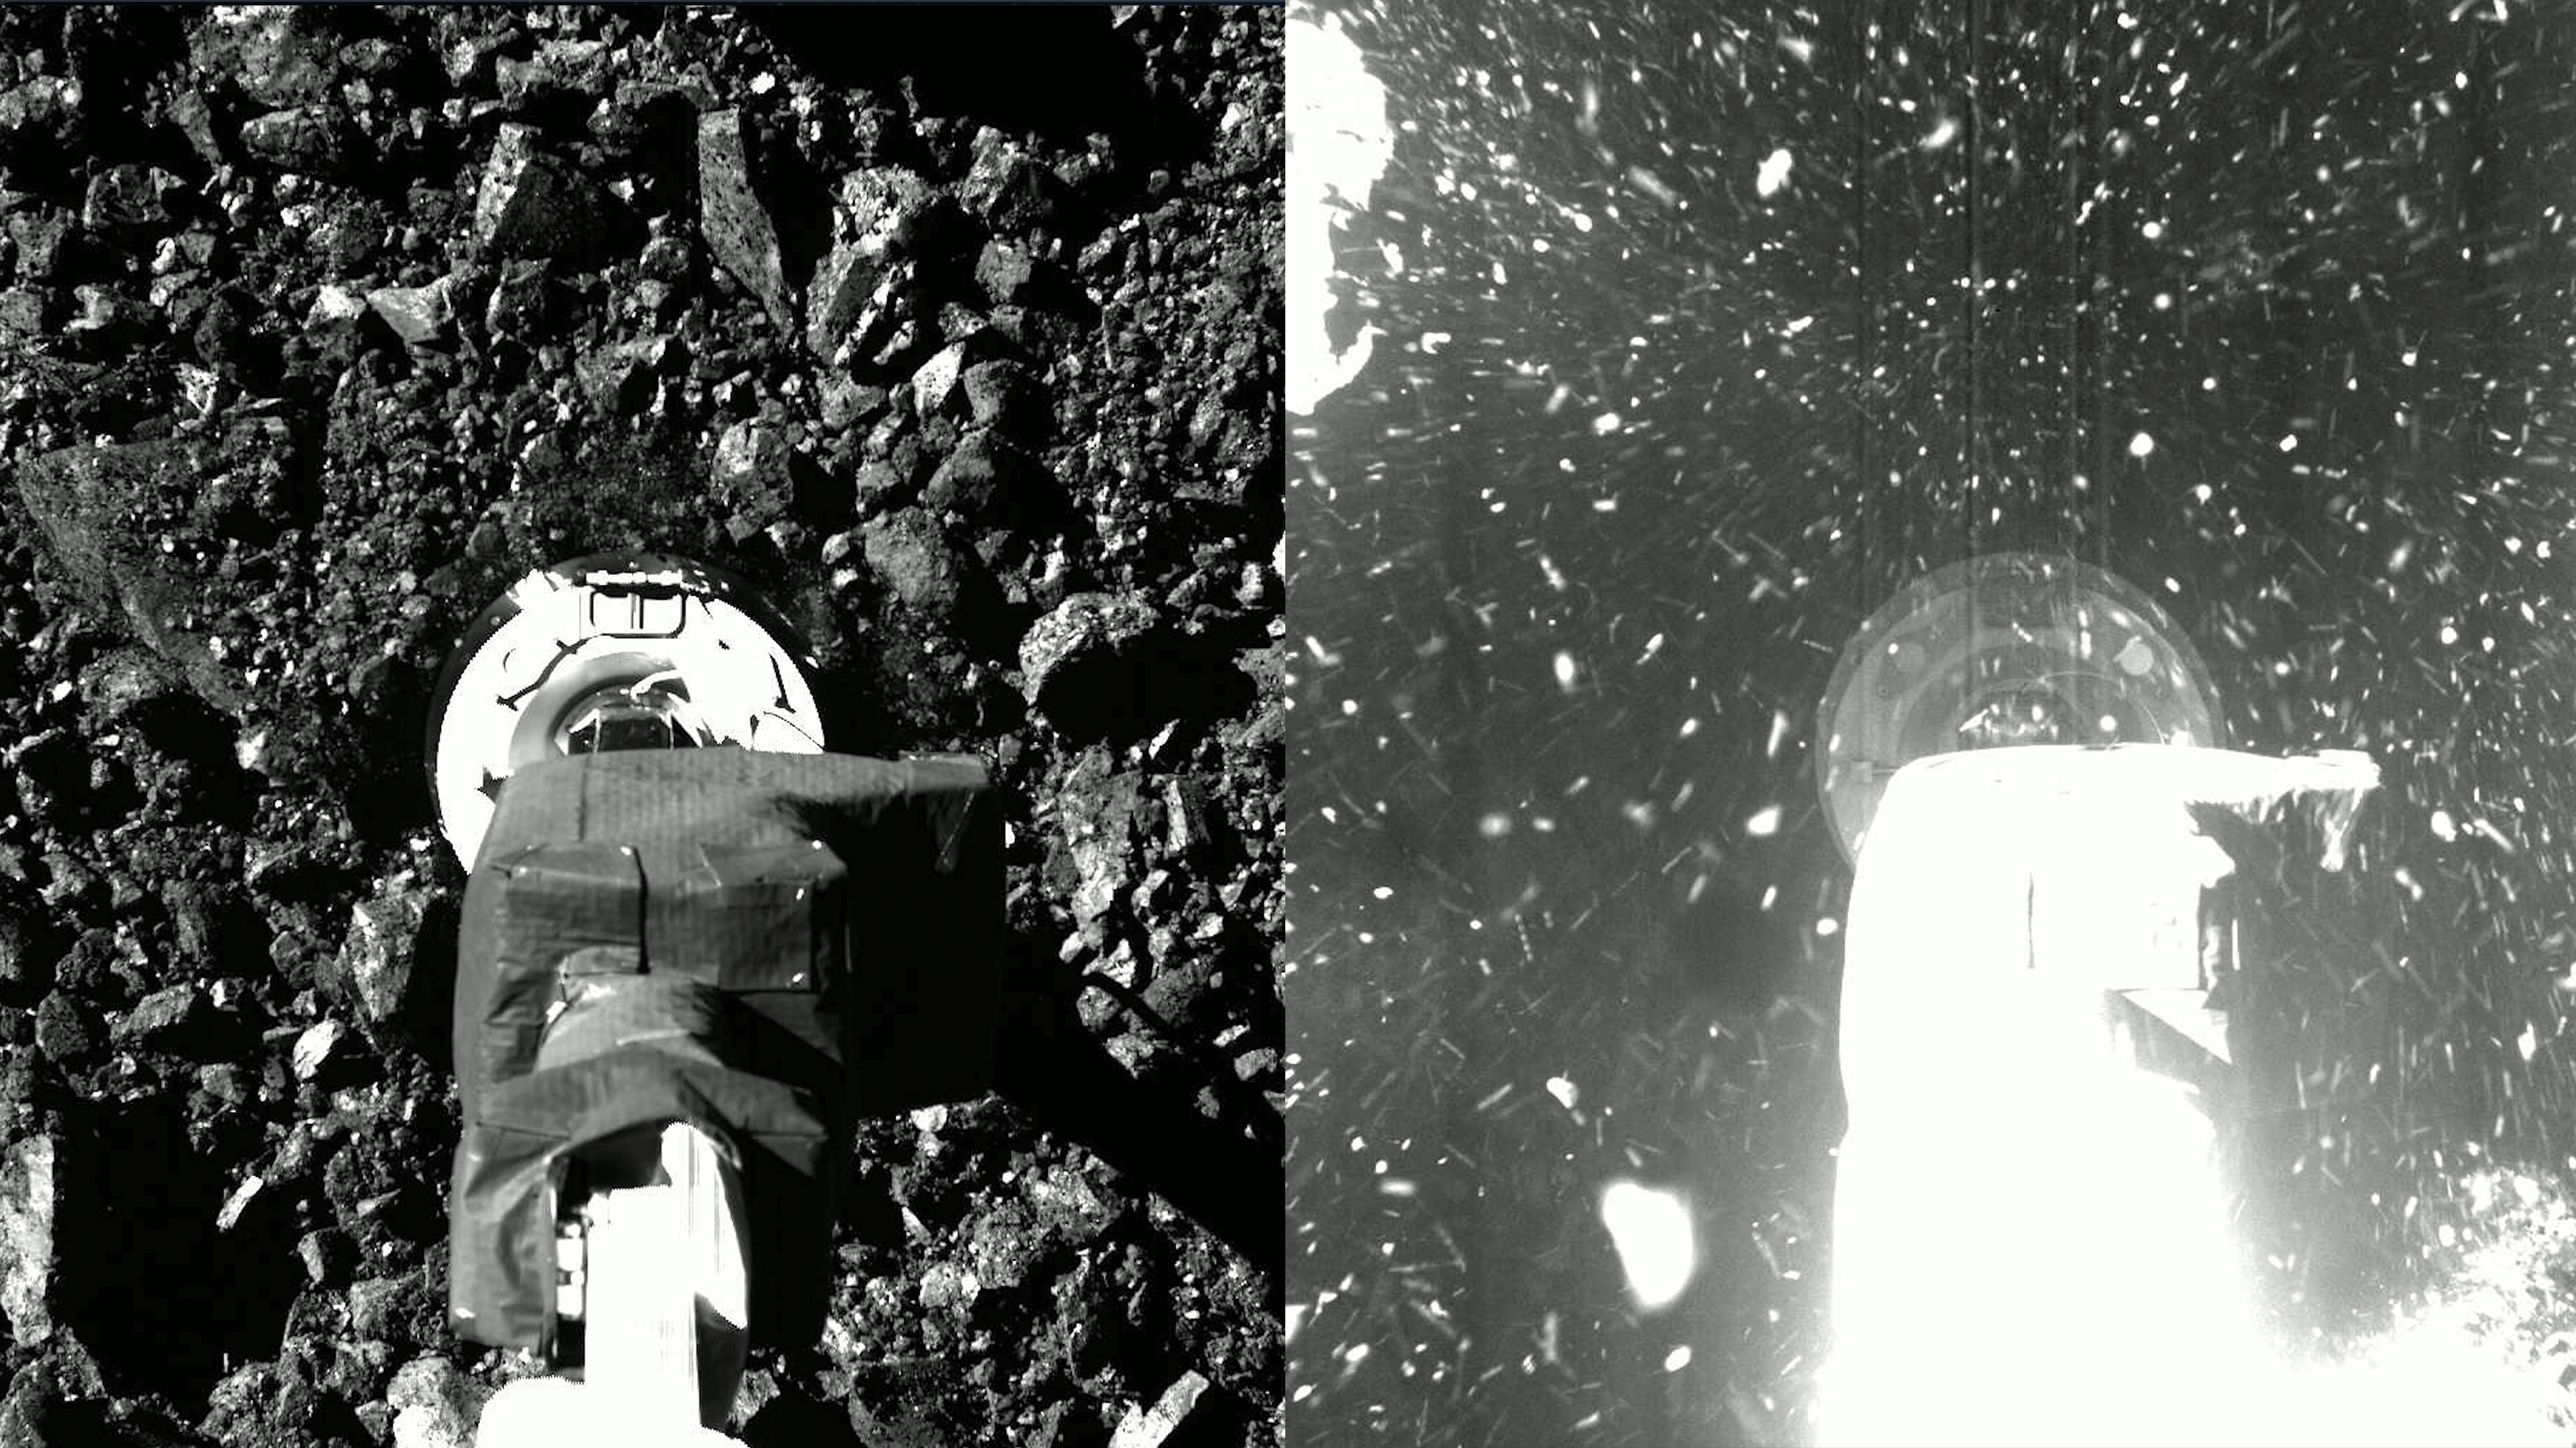 Side-by-side images from NASA's OSIRIS-REx spacecraft of the robotic arm as it descended towards the surface of asteroid Bennu (left) and as it tapped it to stir up dust and rock for sample collection (right) on Oct. 20, 2020.